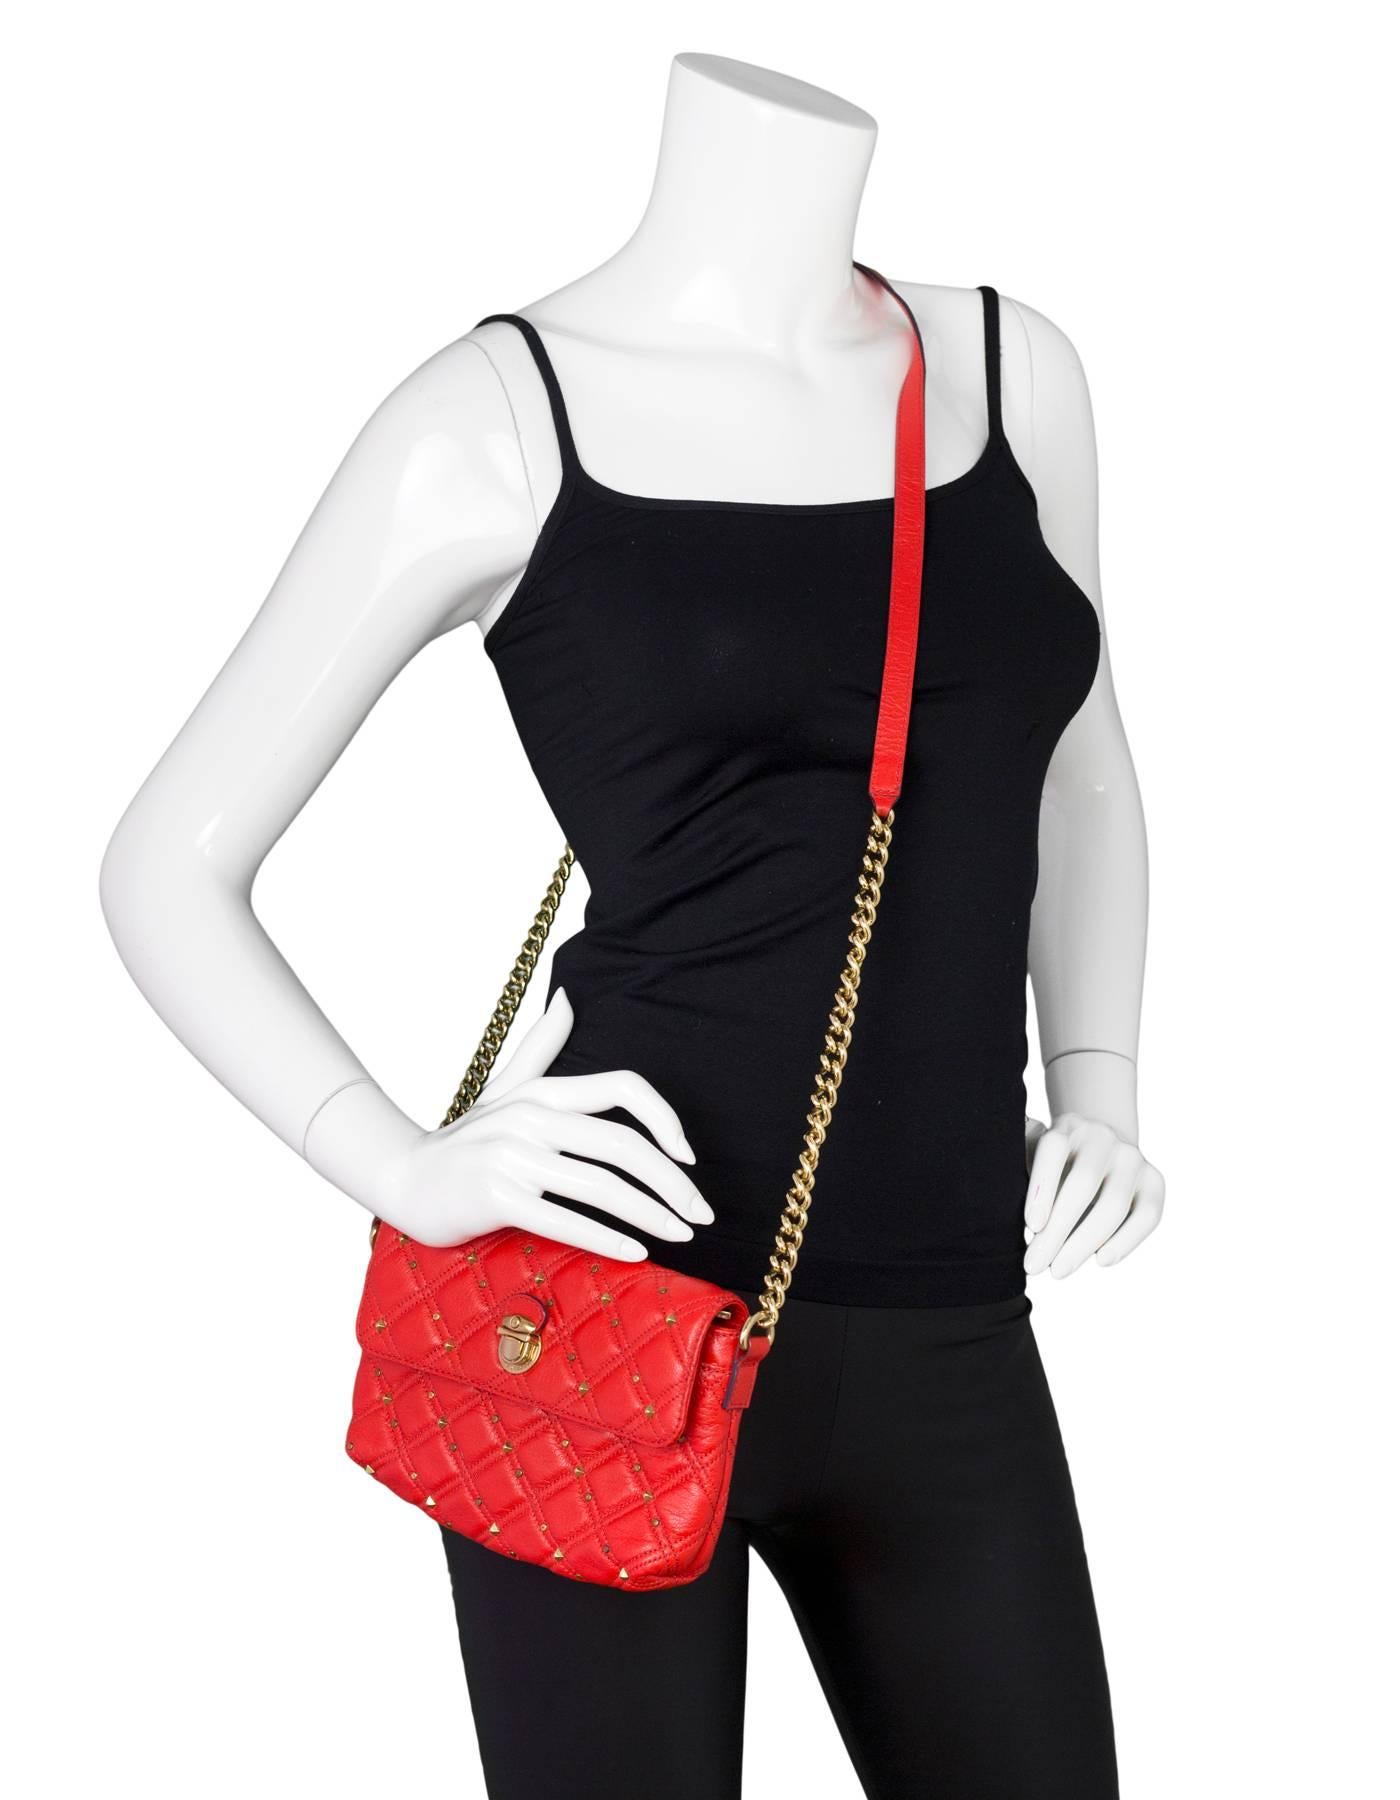 Marc Jacobs Red Leather Studded Crossbody Bag

Made In: Italy
Color: Red
Hardware: Goldtone
Materials: Leather, metal
Lining: Grey textile
Closure/Opening: Flap top with snap closure
Exterior Pockets: None
Interior Pockets: One compartment, zip